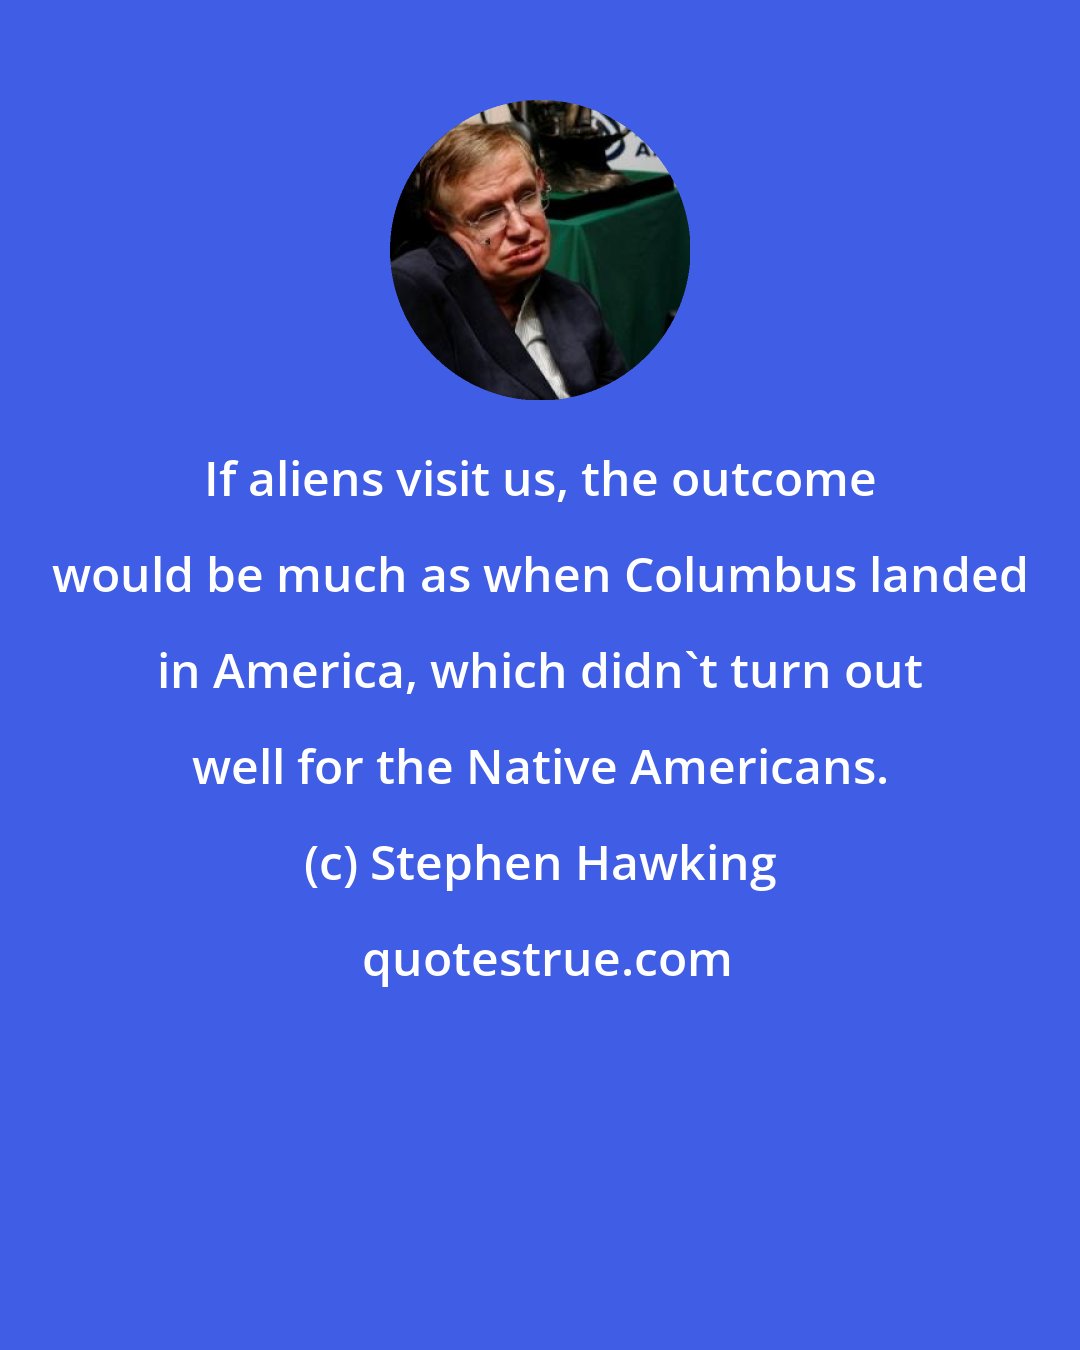 Stephen Hawking: If aliens visit us, the outcome would be much as when Columbus landed in America, which didn't turn out well for the Native Americans.